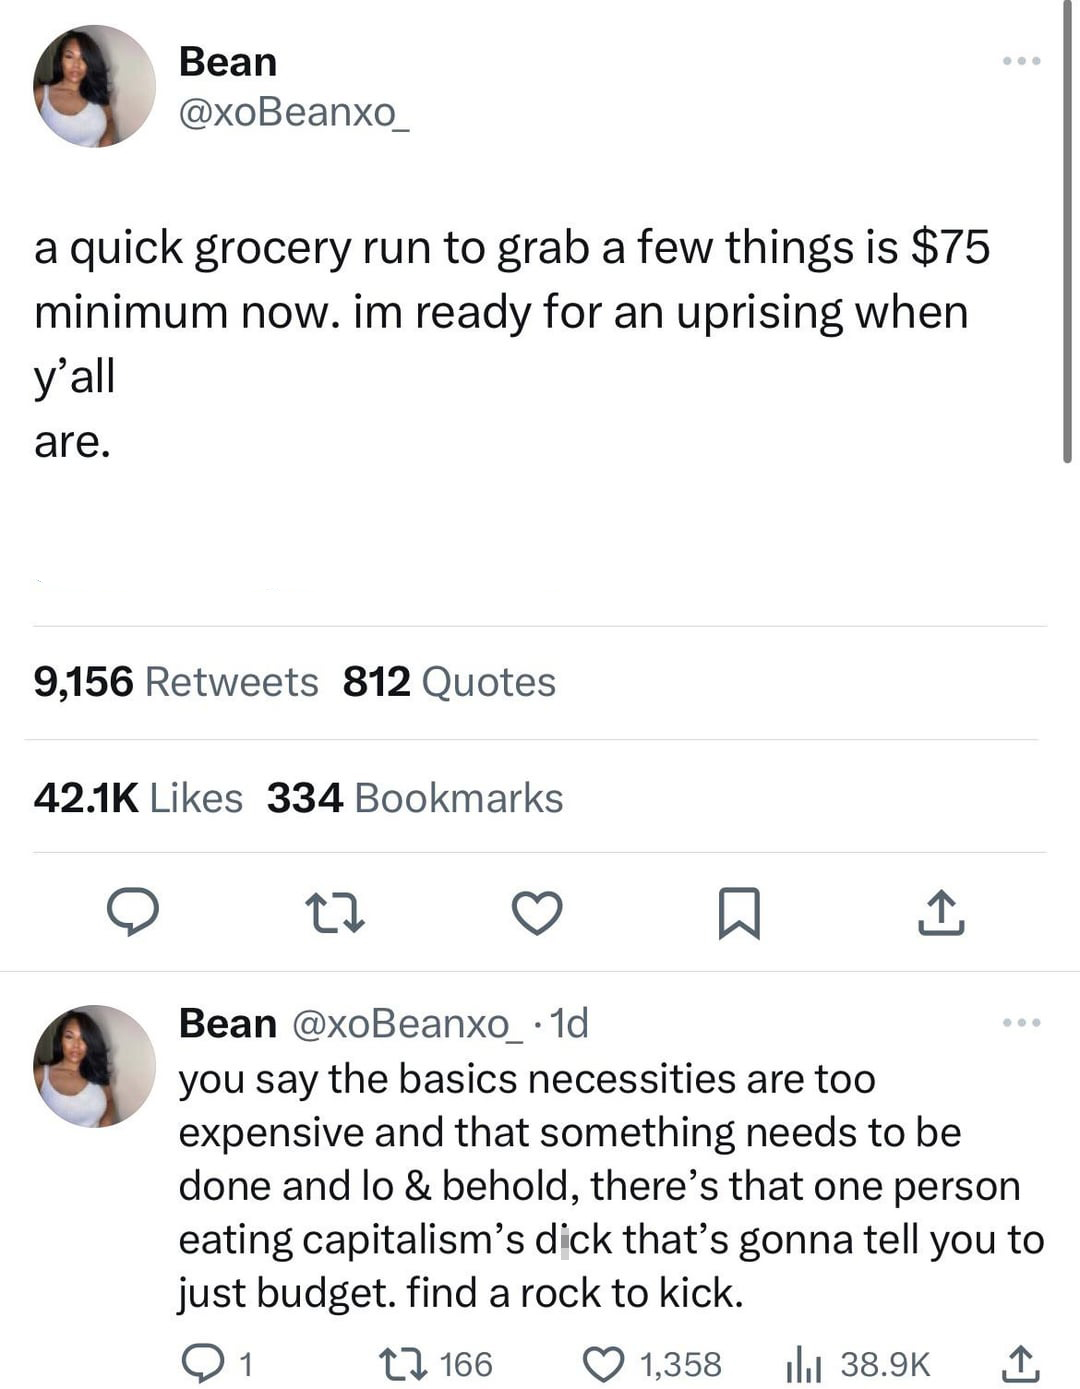 funny tweets - document - Bean a quick grocery run to grab a few things is $75 minimum now. im ready for an uprising when y'all are. 9,156 812 Quotes 334 Bookmarks 27 Bean 1d you say the basics necessities are too expensive and that something needs to be 